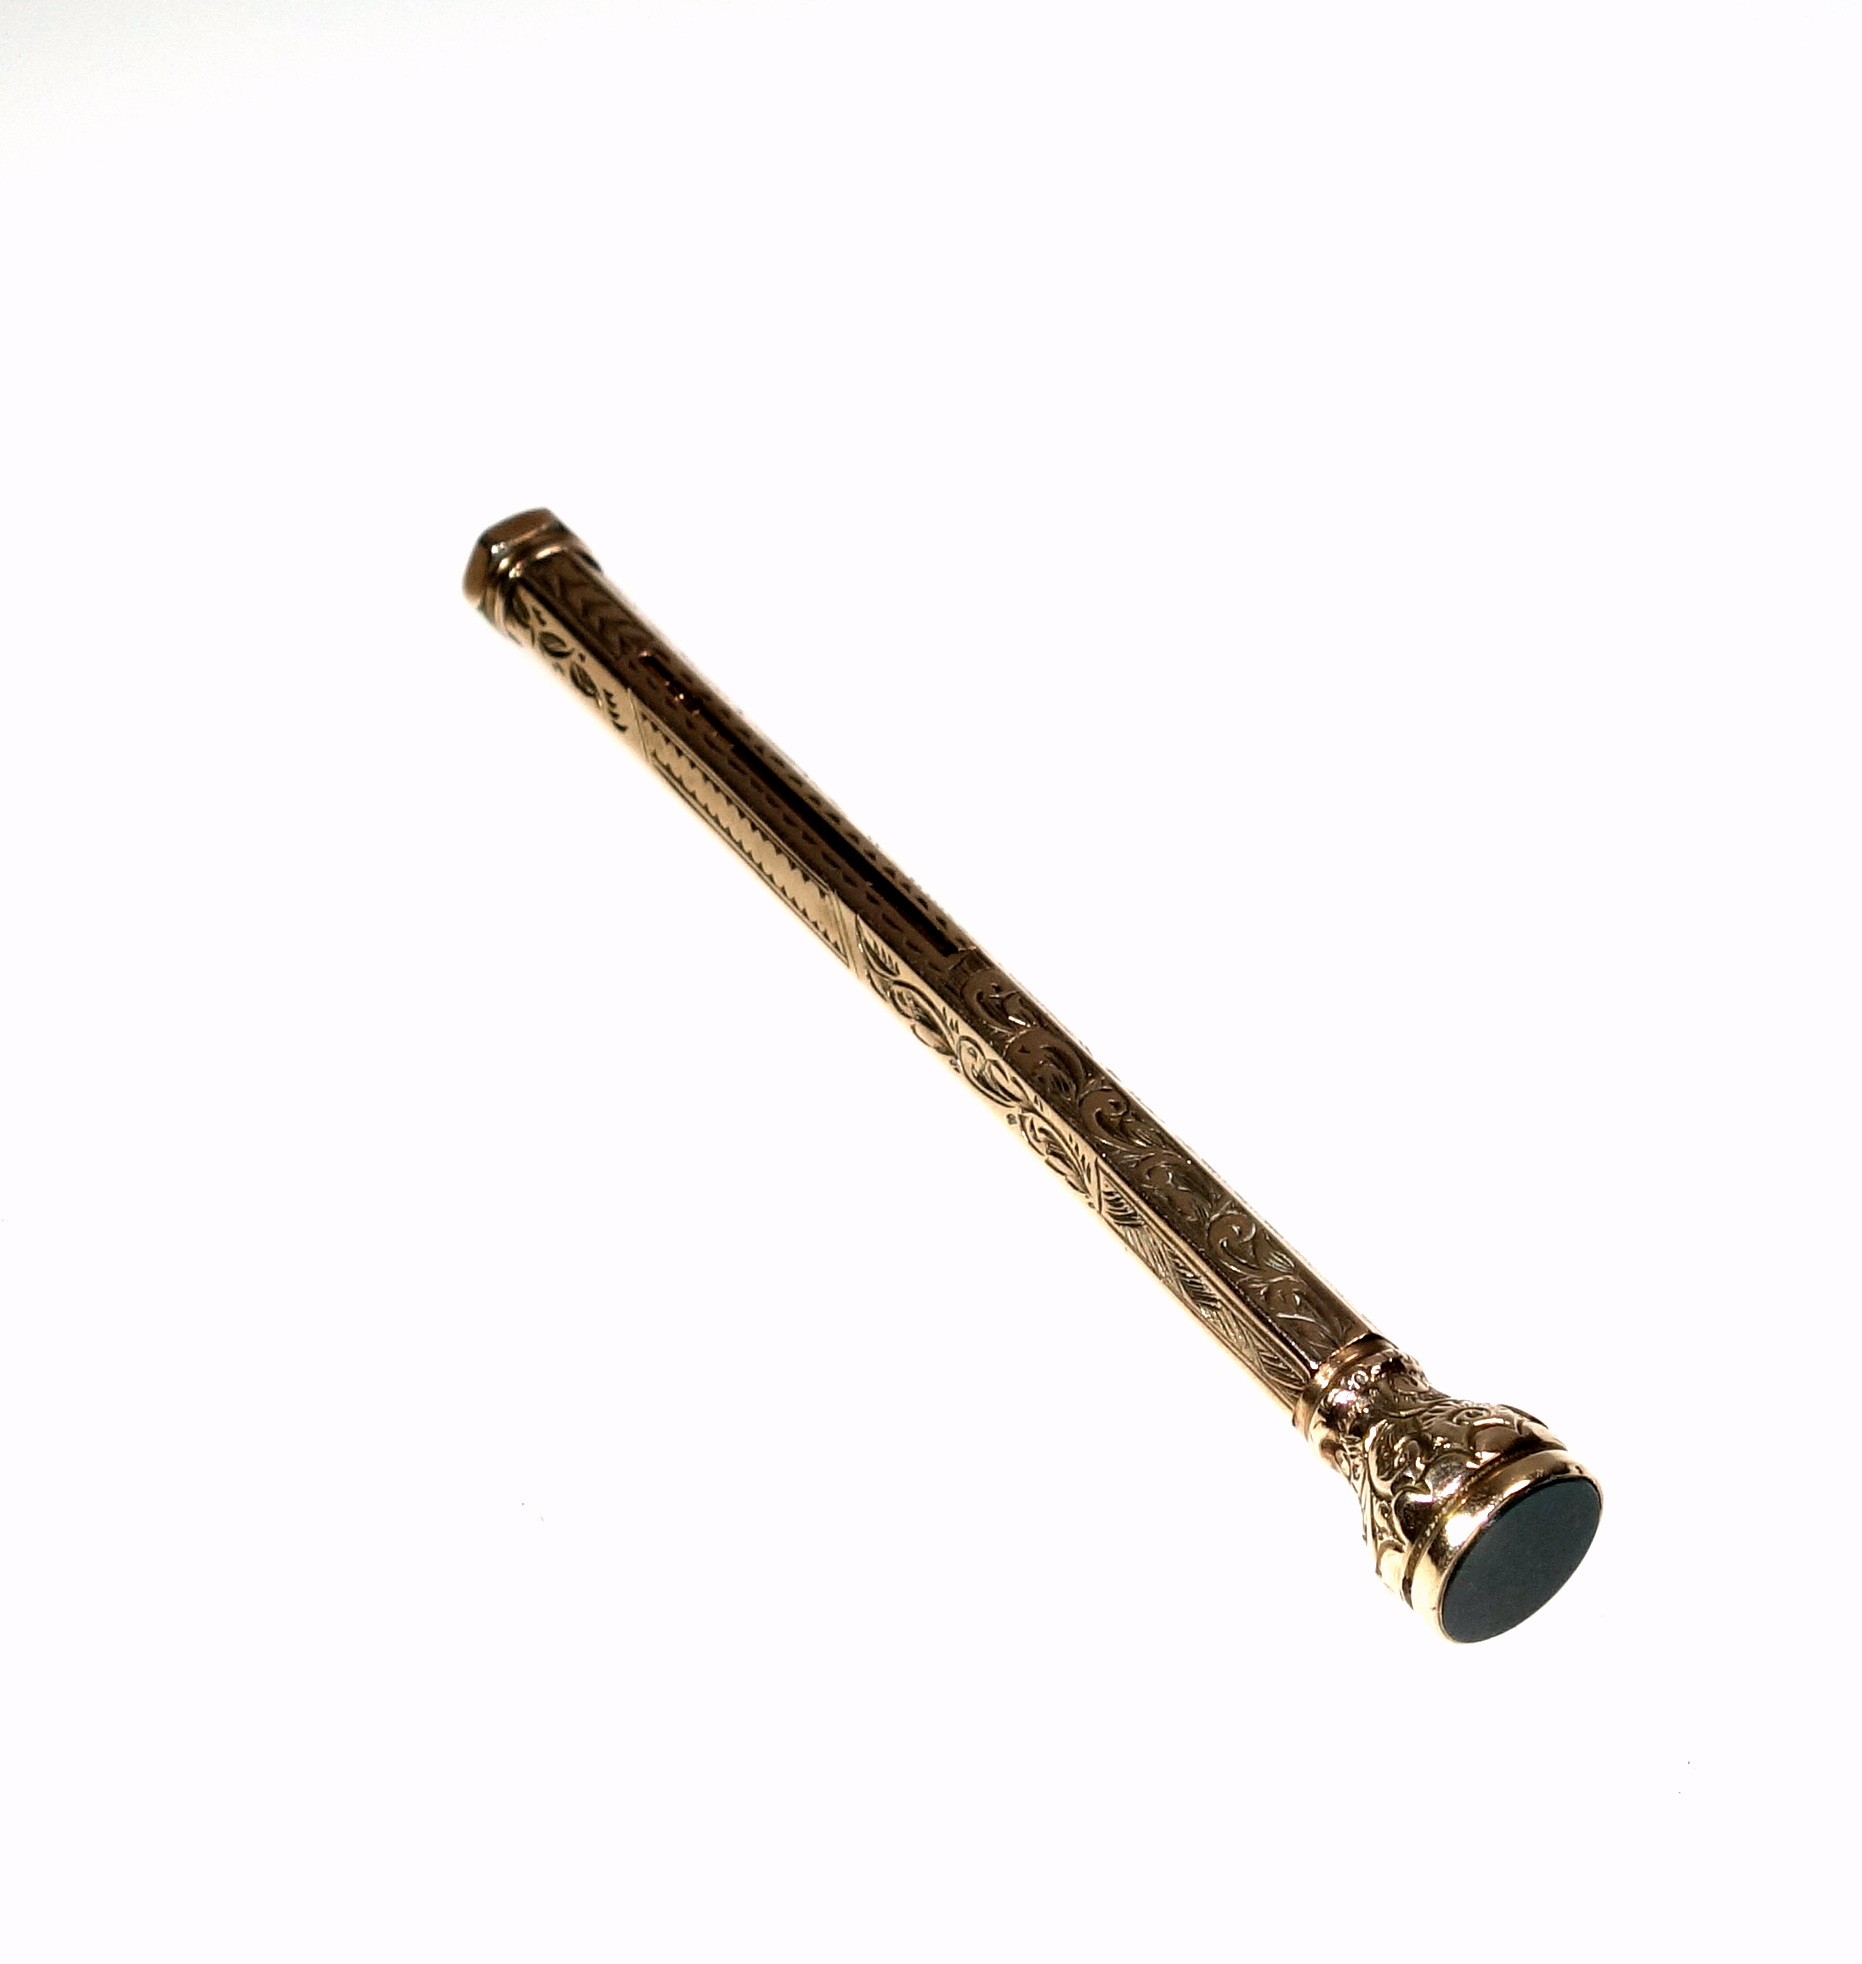 Early 20th Century 9ct gold hexagonal propelling pencil with chased foliate and scroll decoration - Image 3 of 5